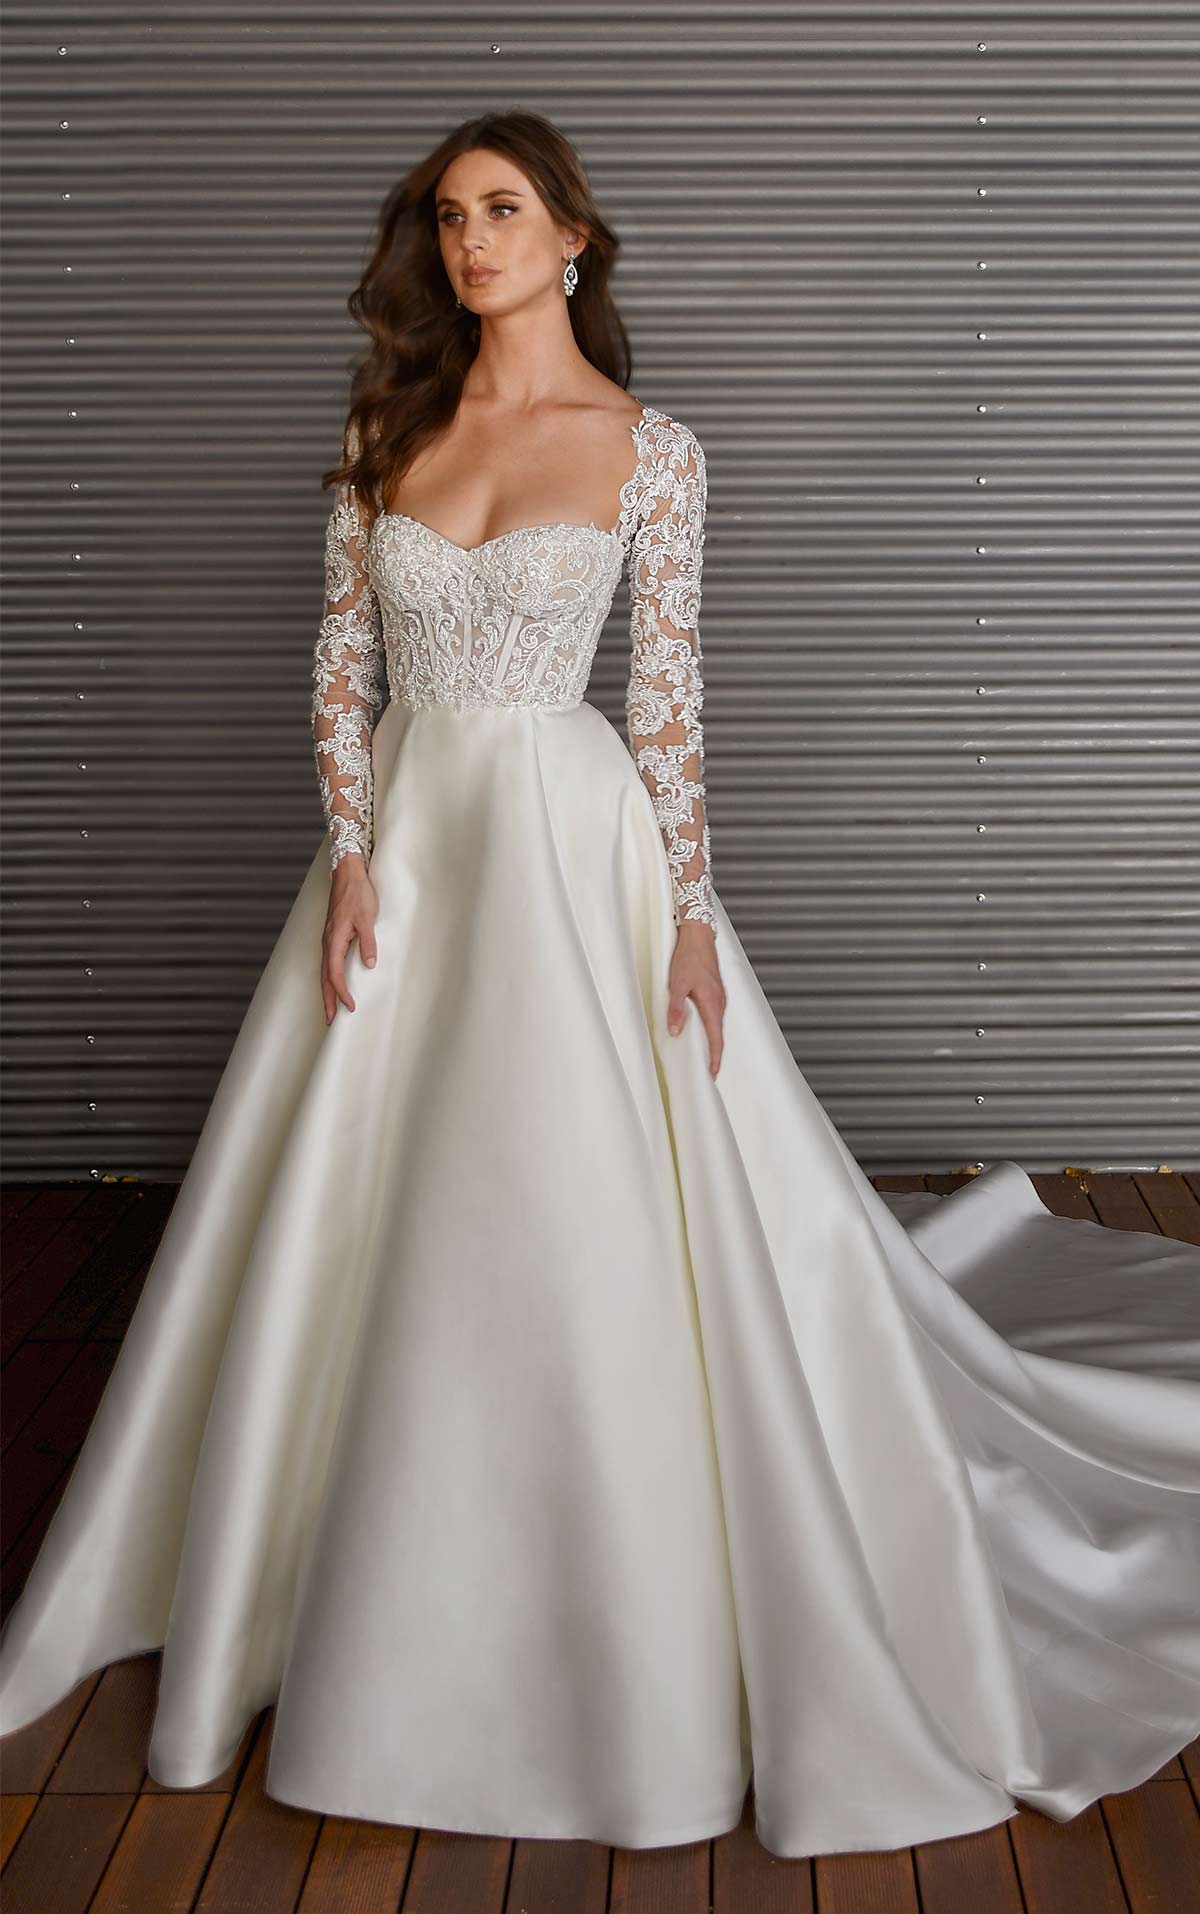 Tulle Ball Gown Wedding Dress With Sweetheart Neckline And